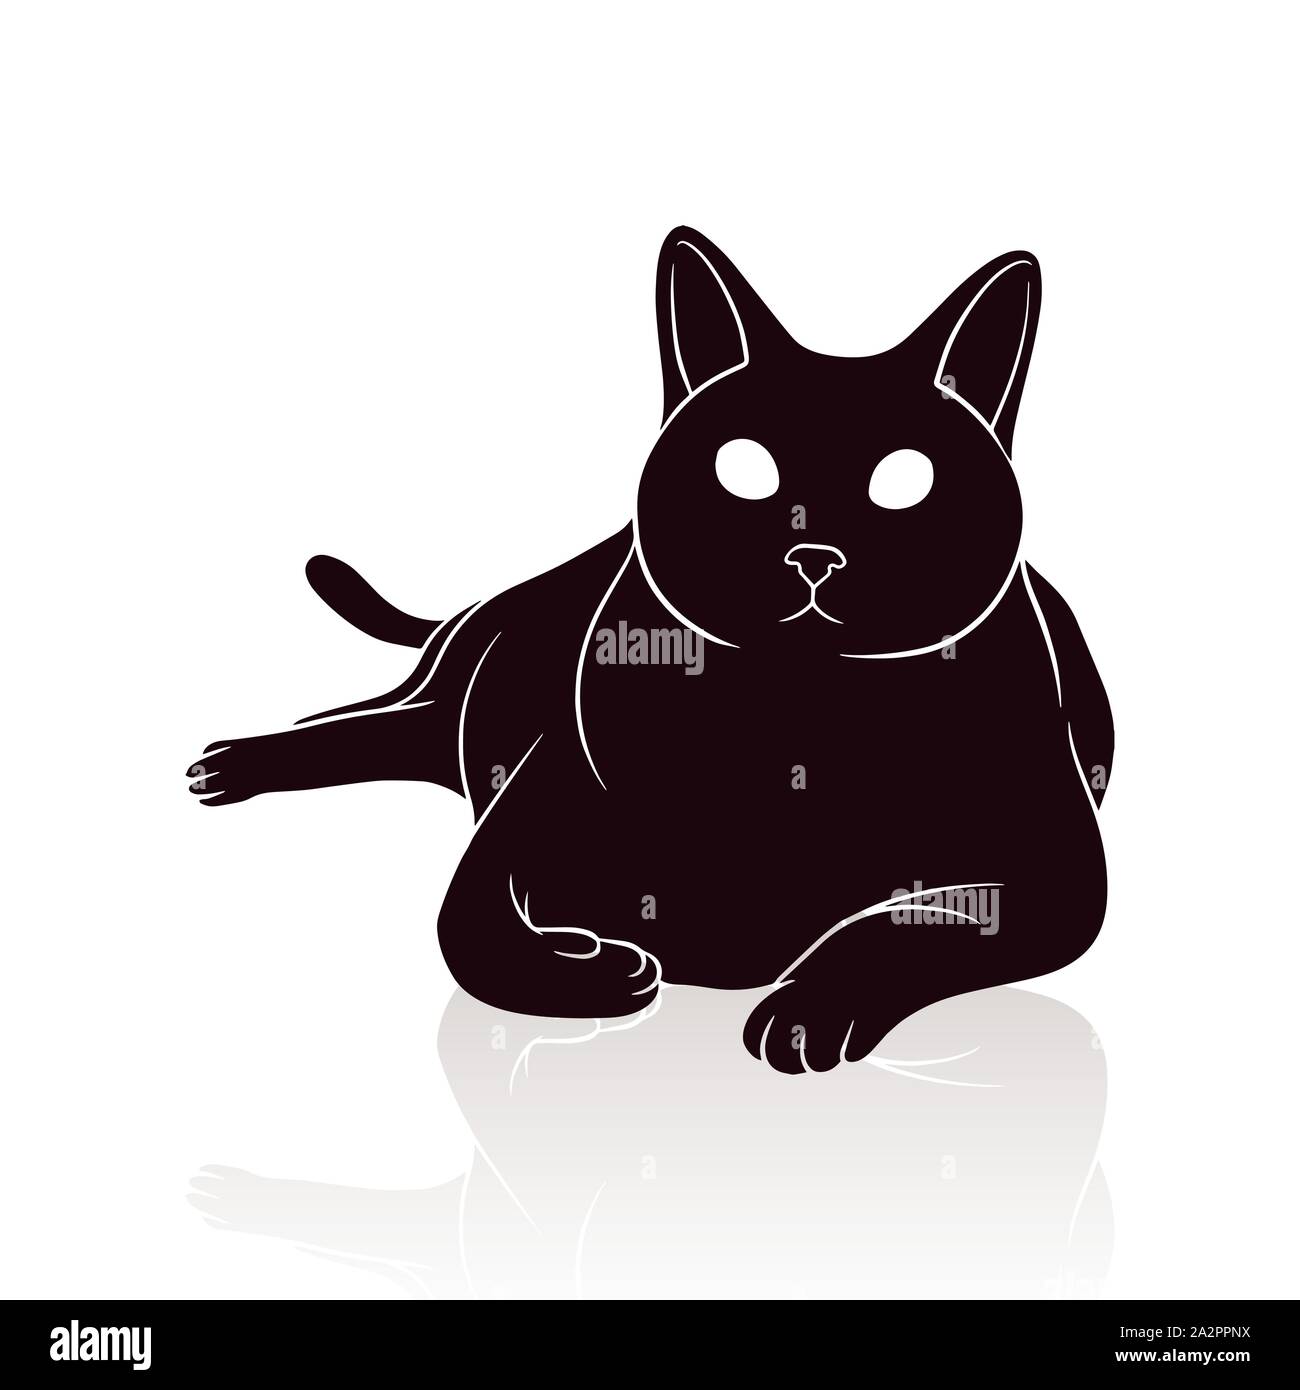 cat silhouette vector illustration isolated on white background Stock Vector